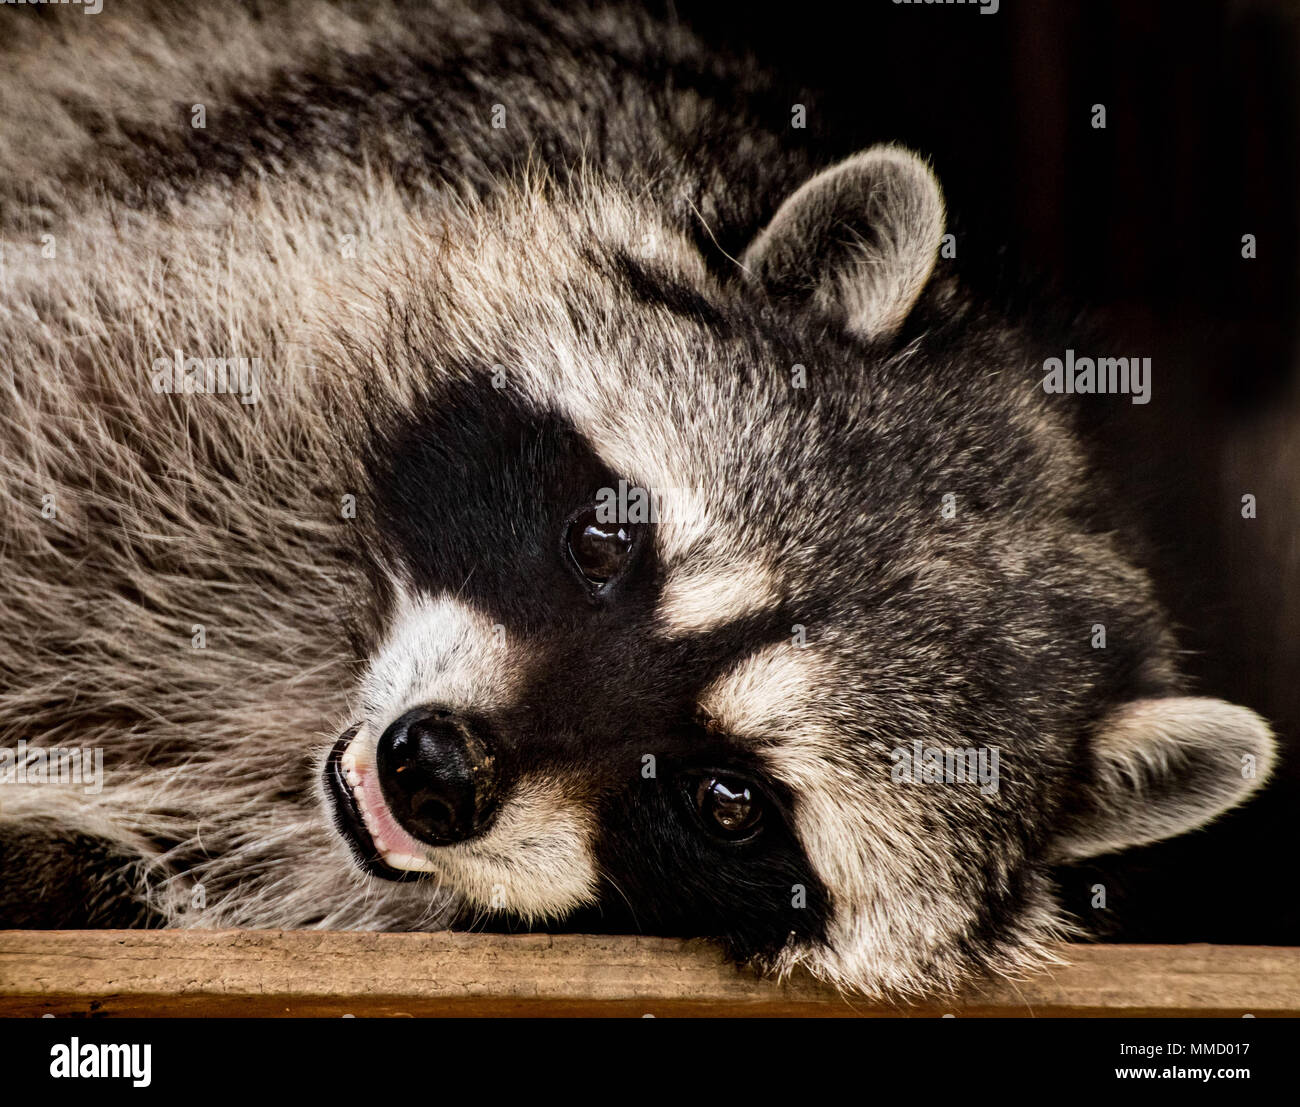 Raccoon relaxing and smiling Stock Photo